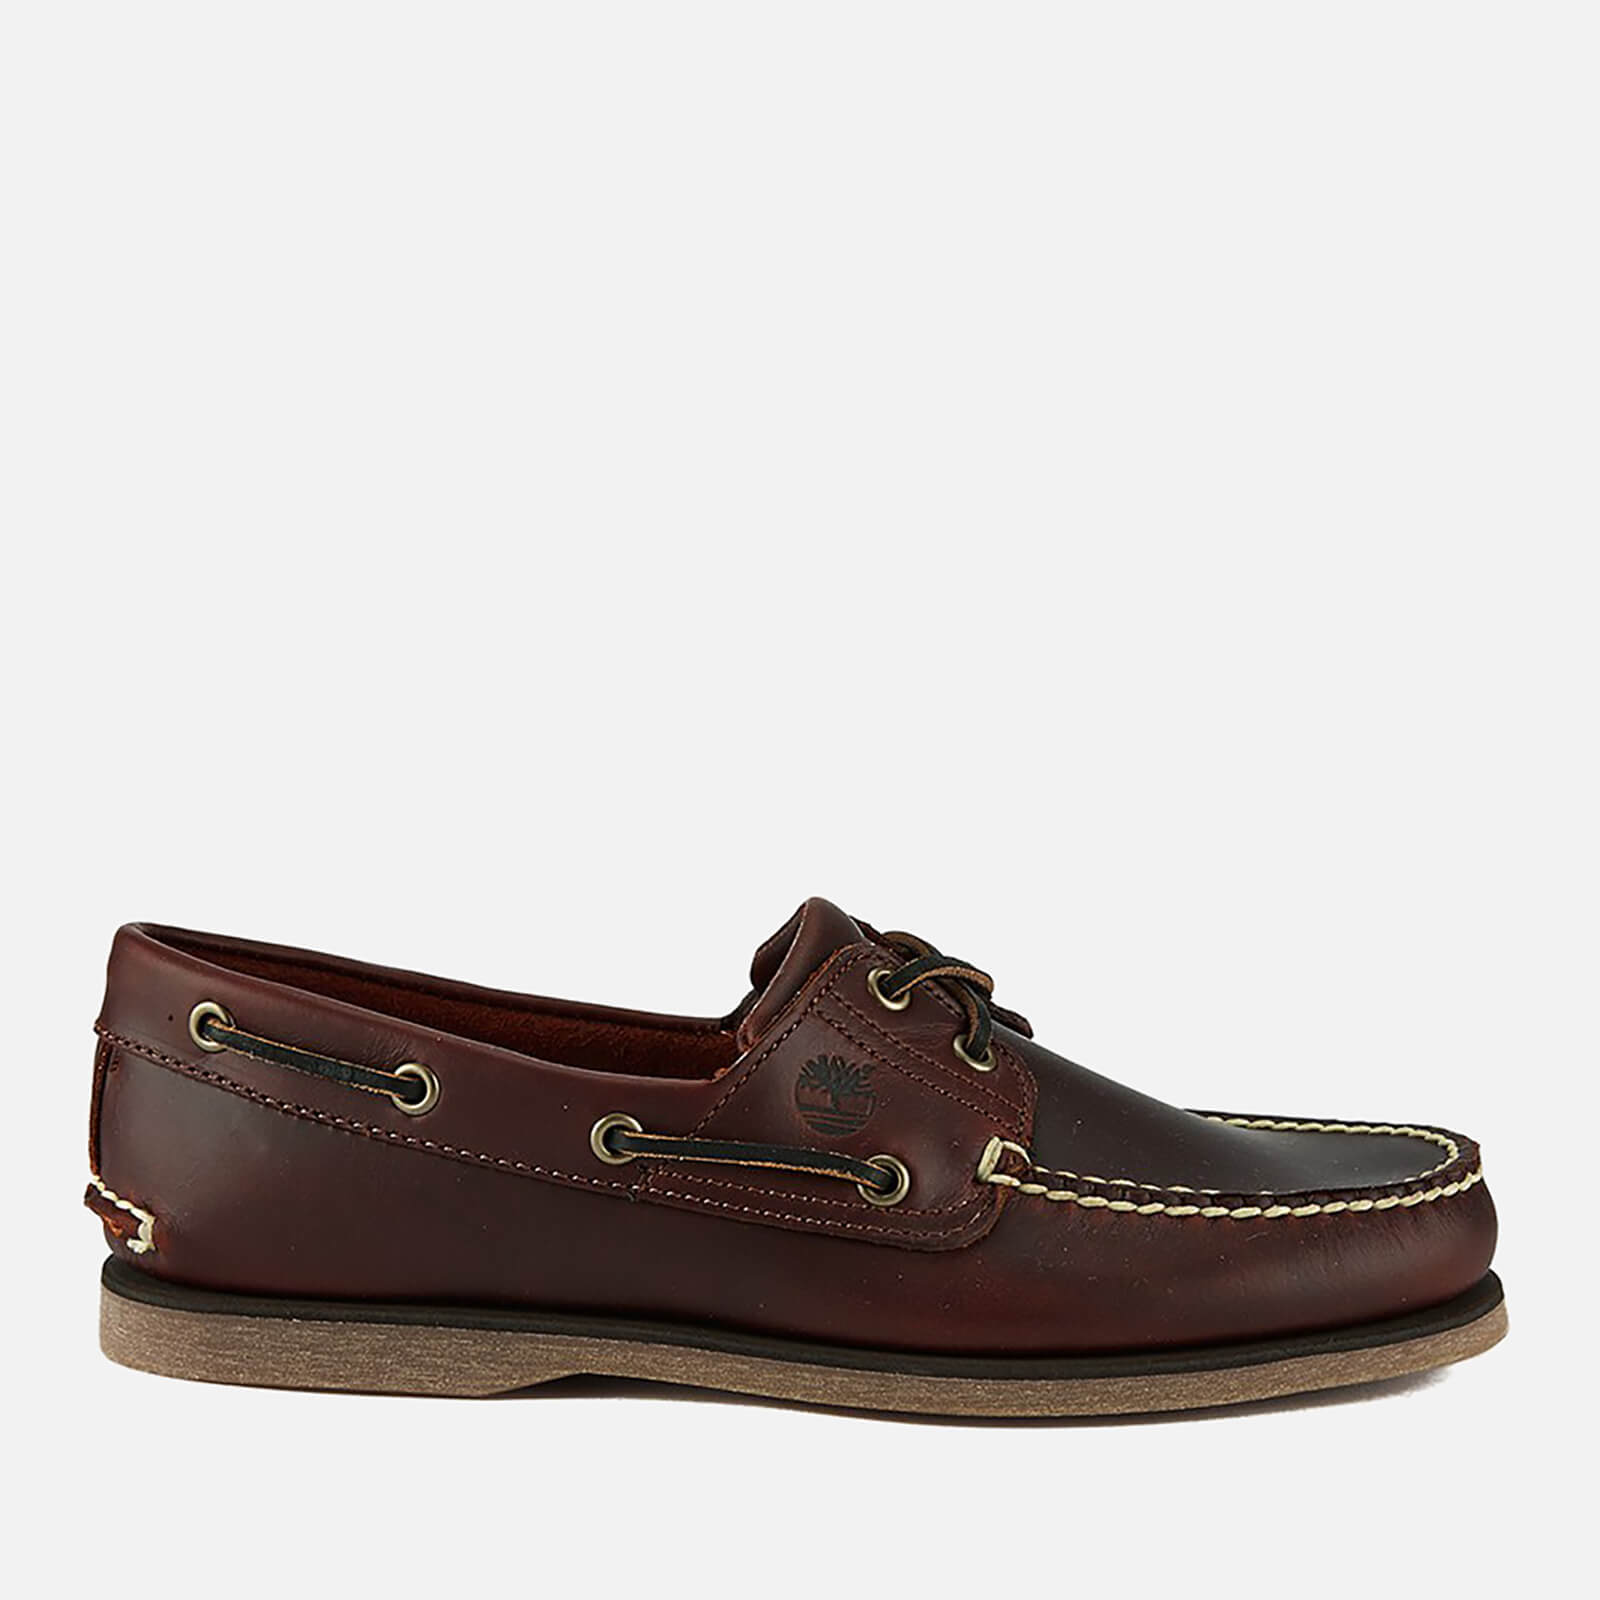 Timberland Men’s Classic 2-Eye Boat Shoes - Rootbeer Smooth